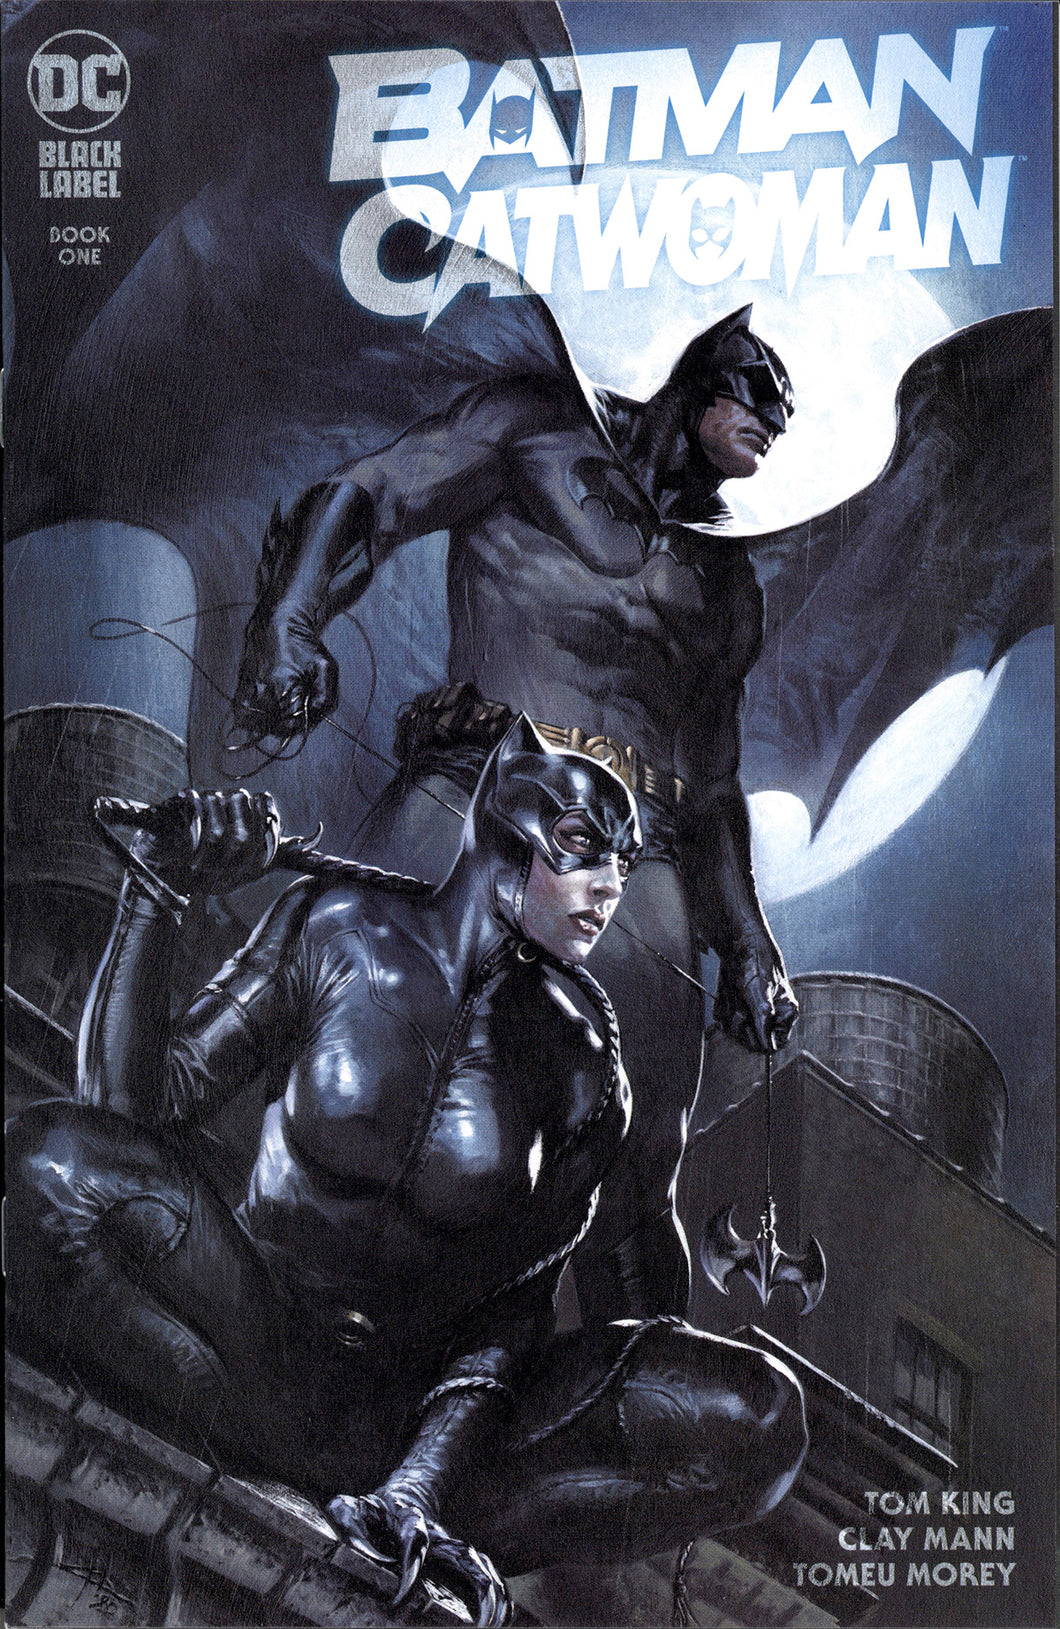 BATMAN CATWOMAN #1 LIMITED TEAM VARIANT BY GABRIELE DELL'OTTO - IN HAND - Collectors Choice Comics